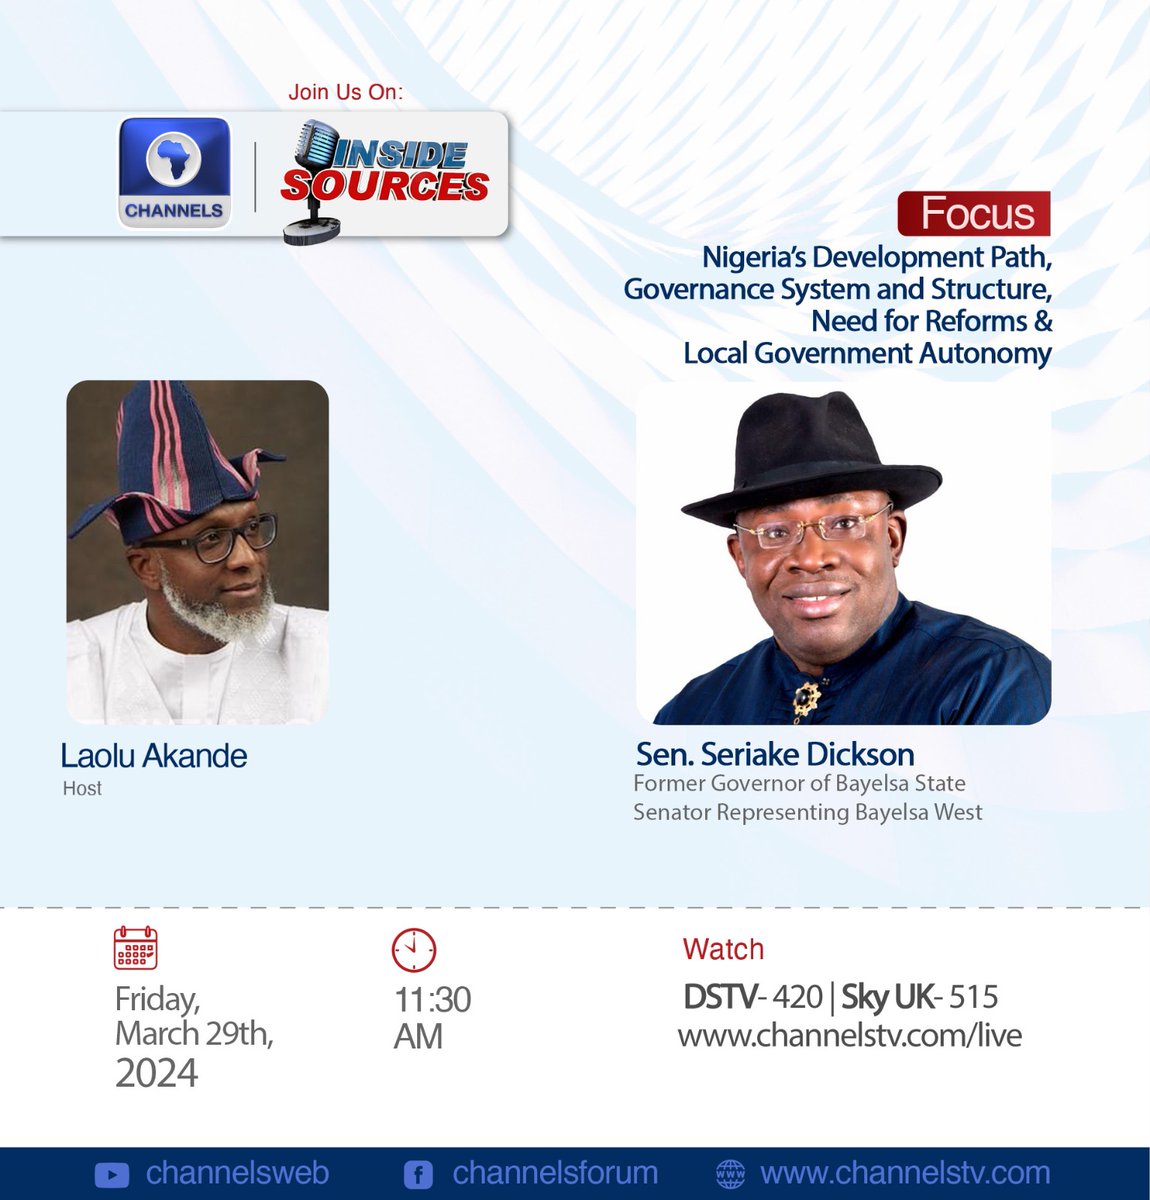 #InsideSources edition today hosts eminent politician & lawyer, former Bayelsa Gov. Dickson. He warns that Nigerian political elite 're attempting suicide, describes presidency & many Govs as emperors and observes that oil theft challenges are deliberate. So refreshingly frank!